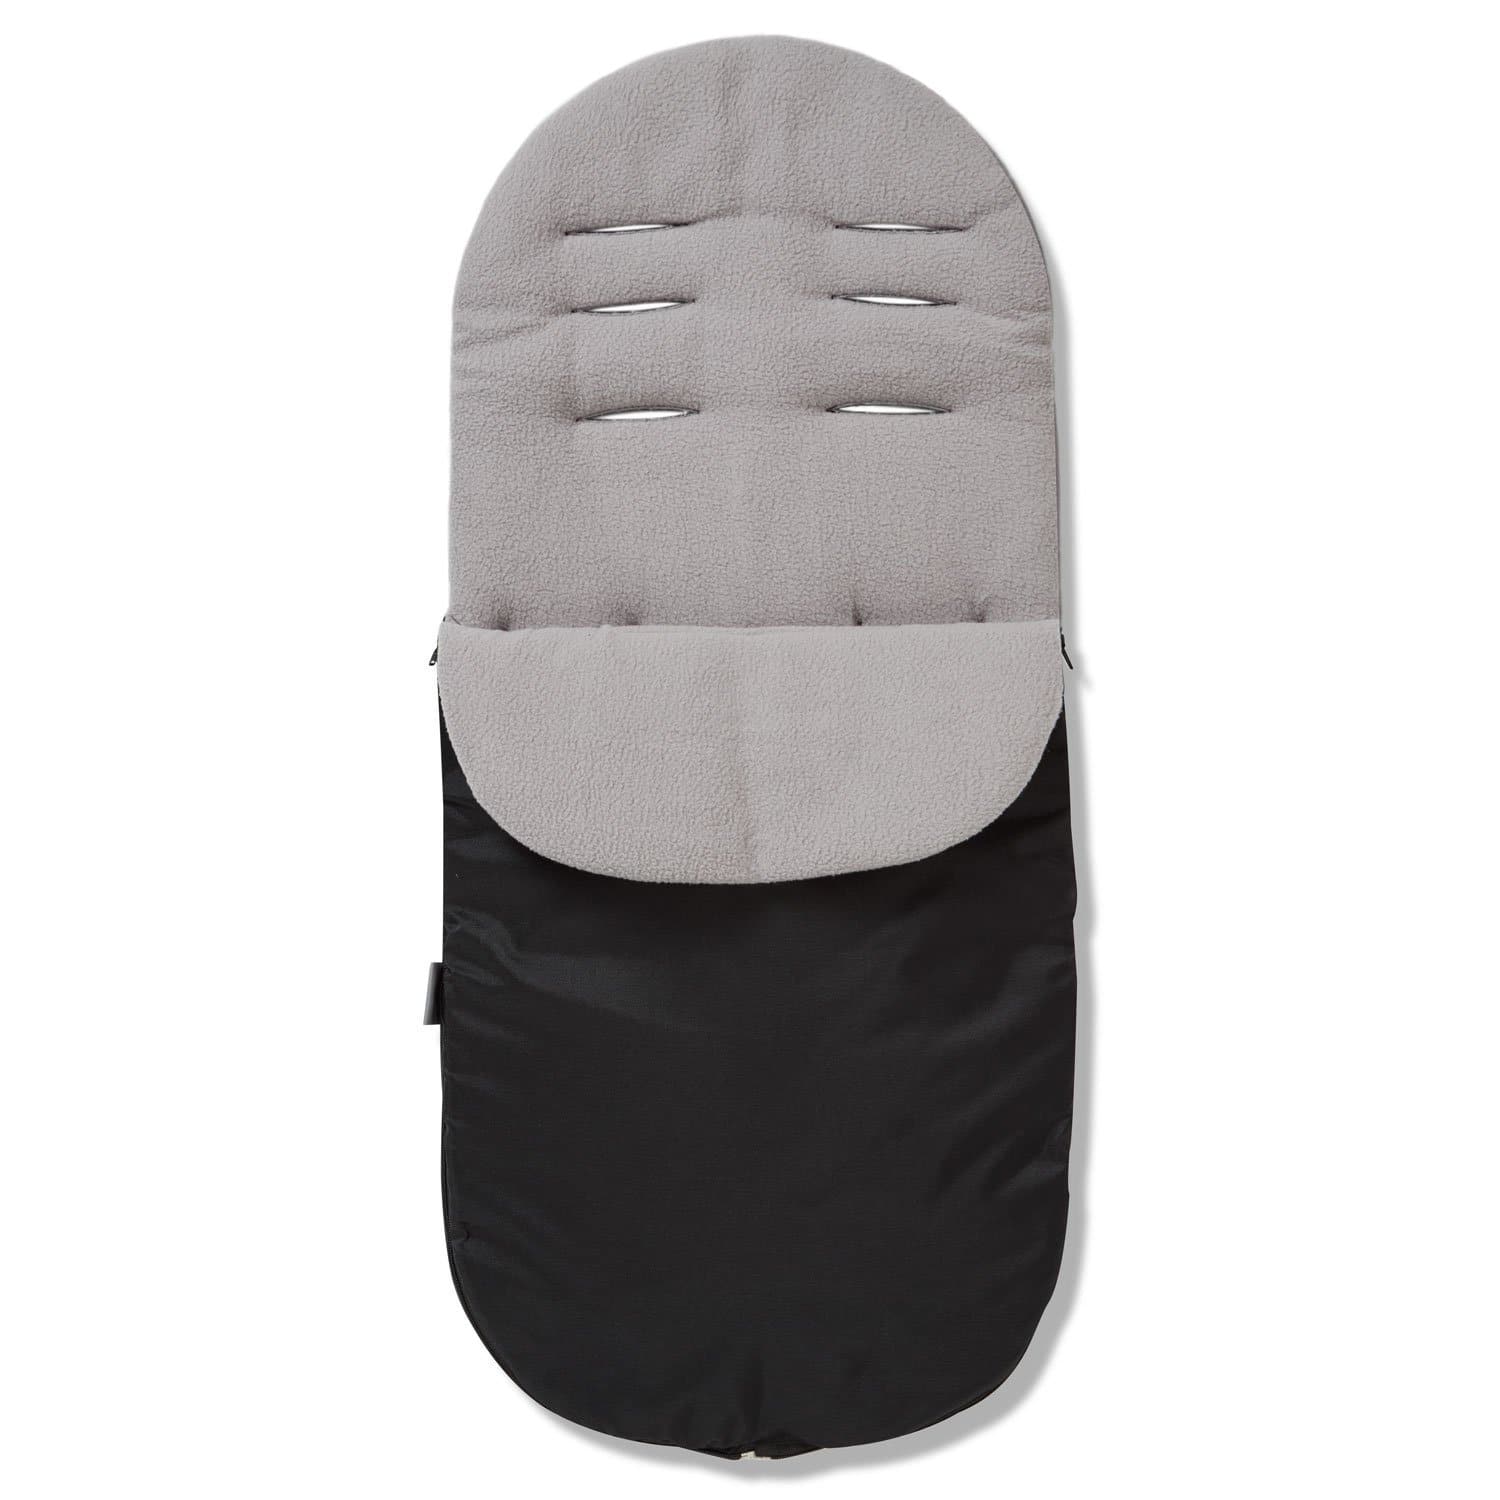 Footmuff / Cosy Toes Compatible with Petite - Grey / Fits All Models | For Your Little One